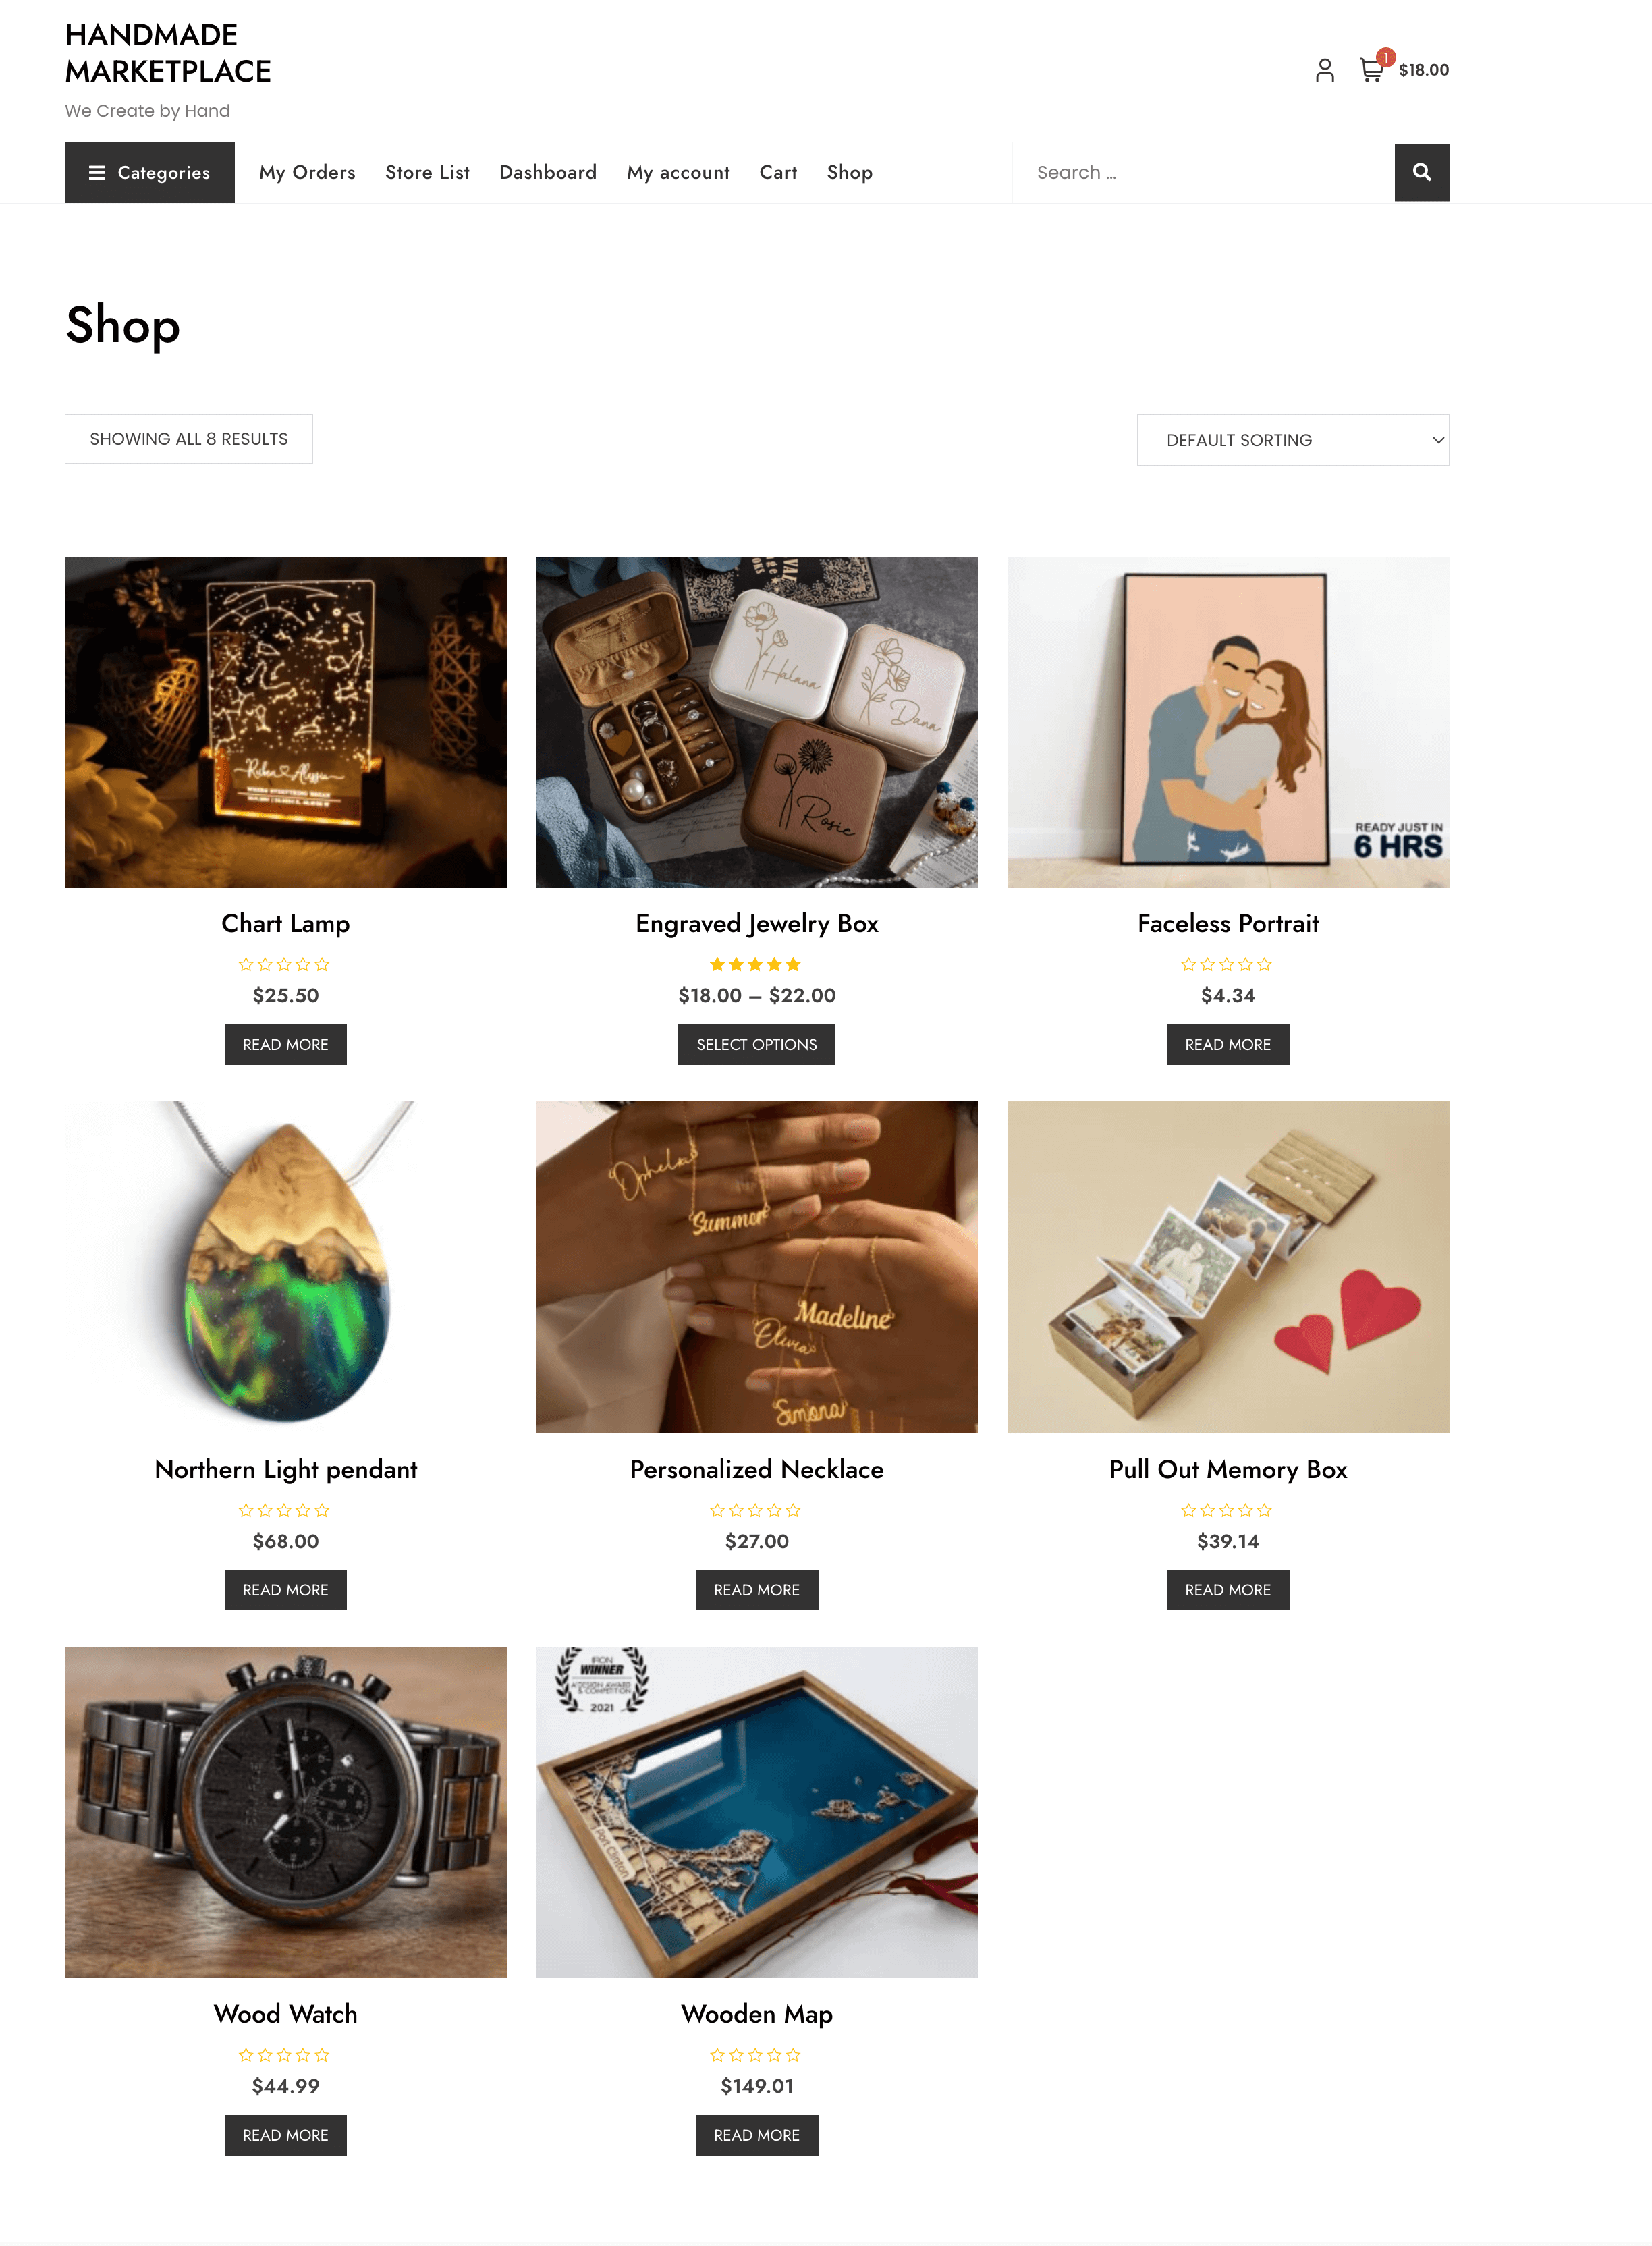 This is a screenshot of a handmade marketplace like the Etsy Marketplace